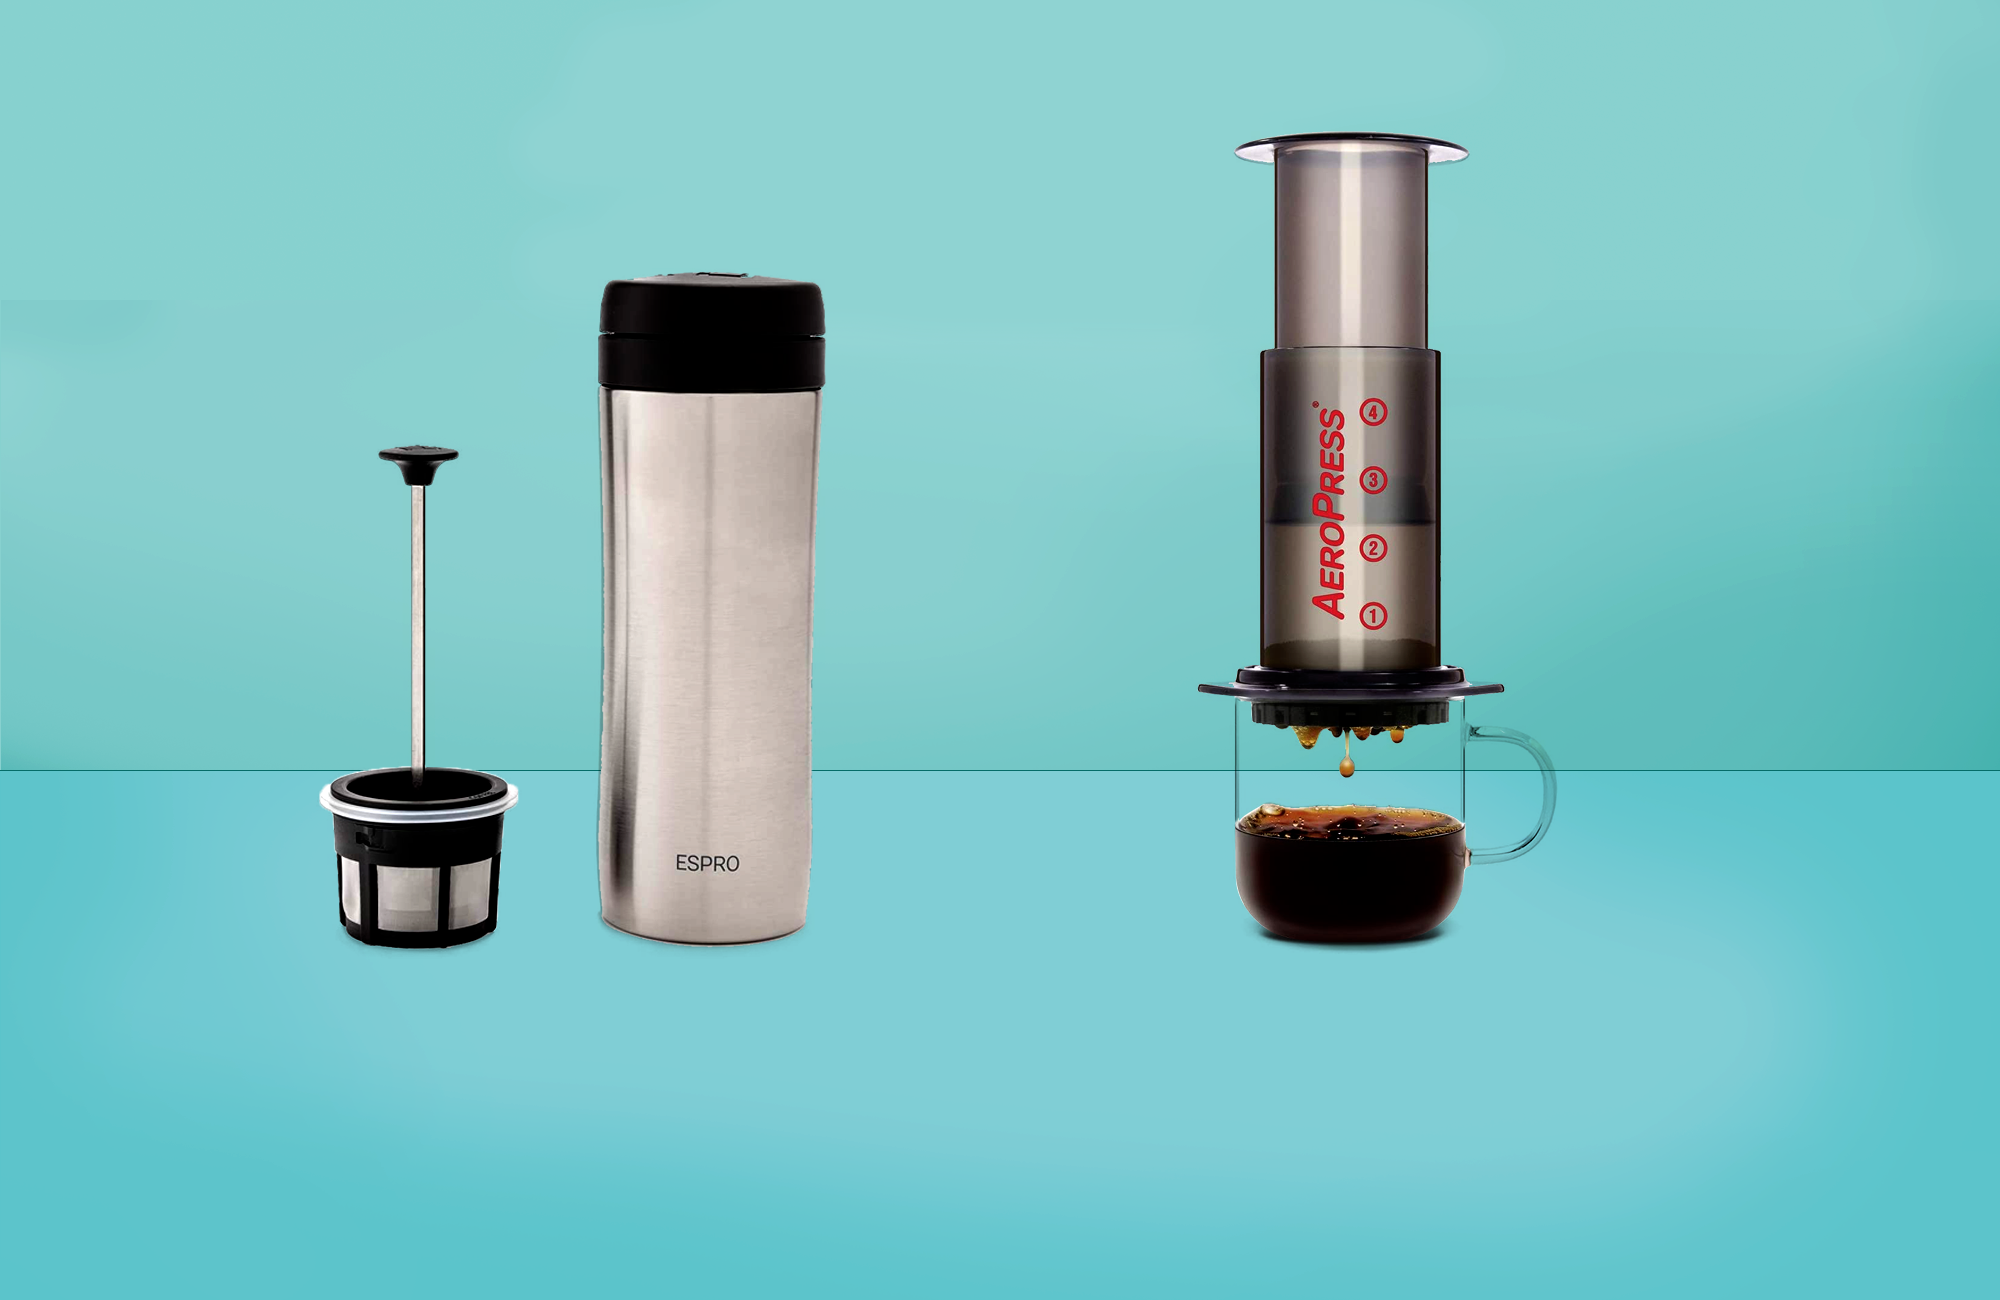 7 Coffee Maker Brewing Gadgets to Use While Camping